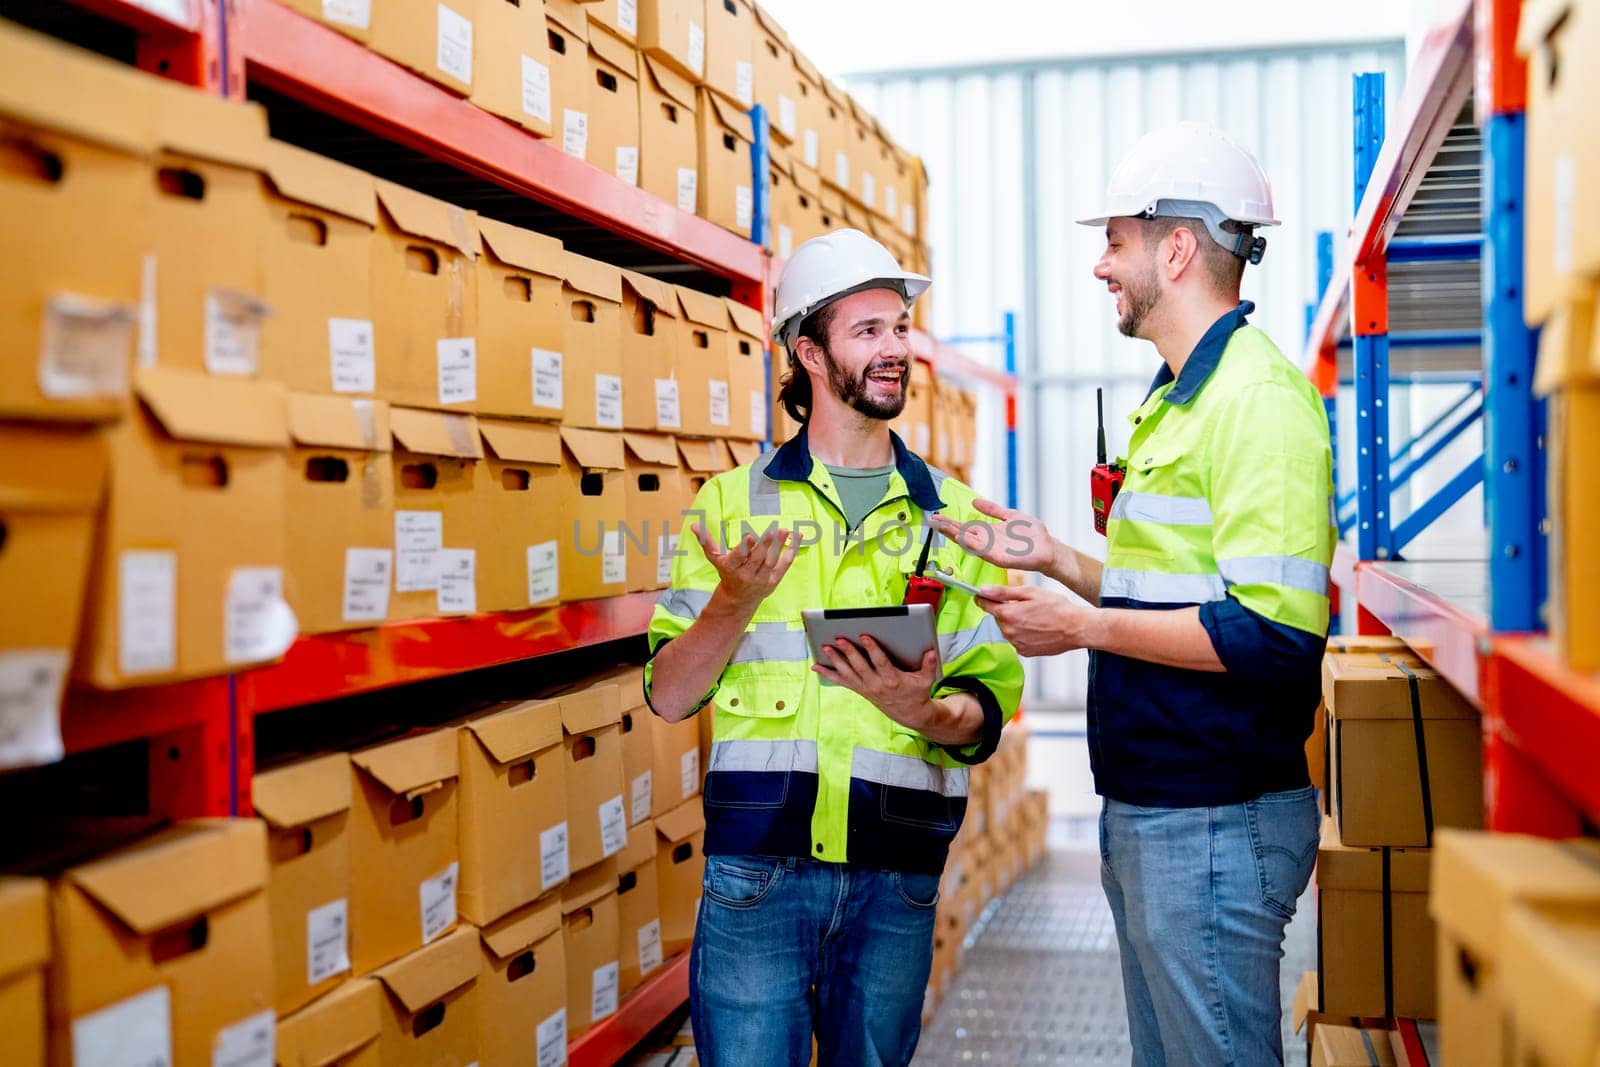 Two professional warehouse worker men discuss about work and stay between shelves with product in workplace and they look happy. by nrradmin